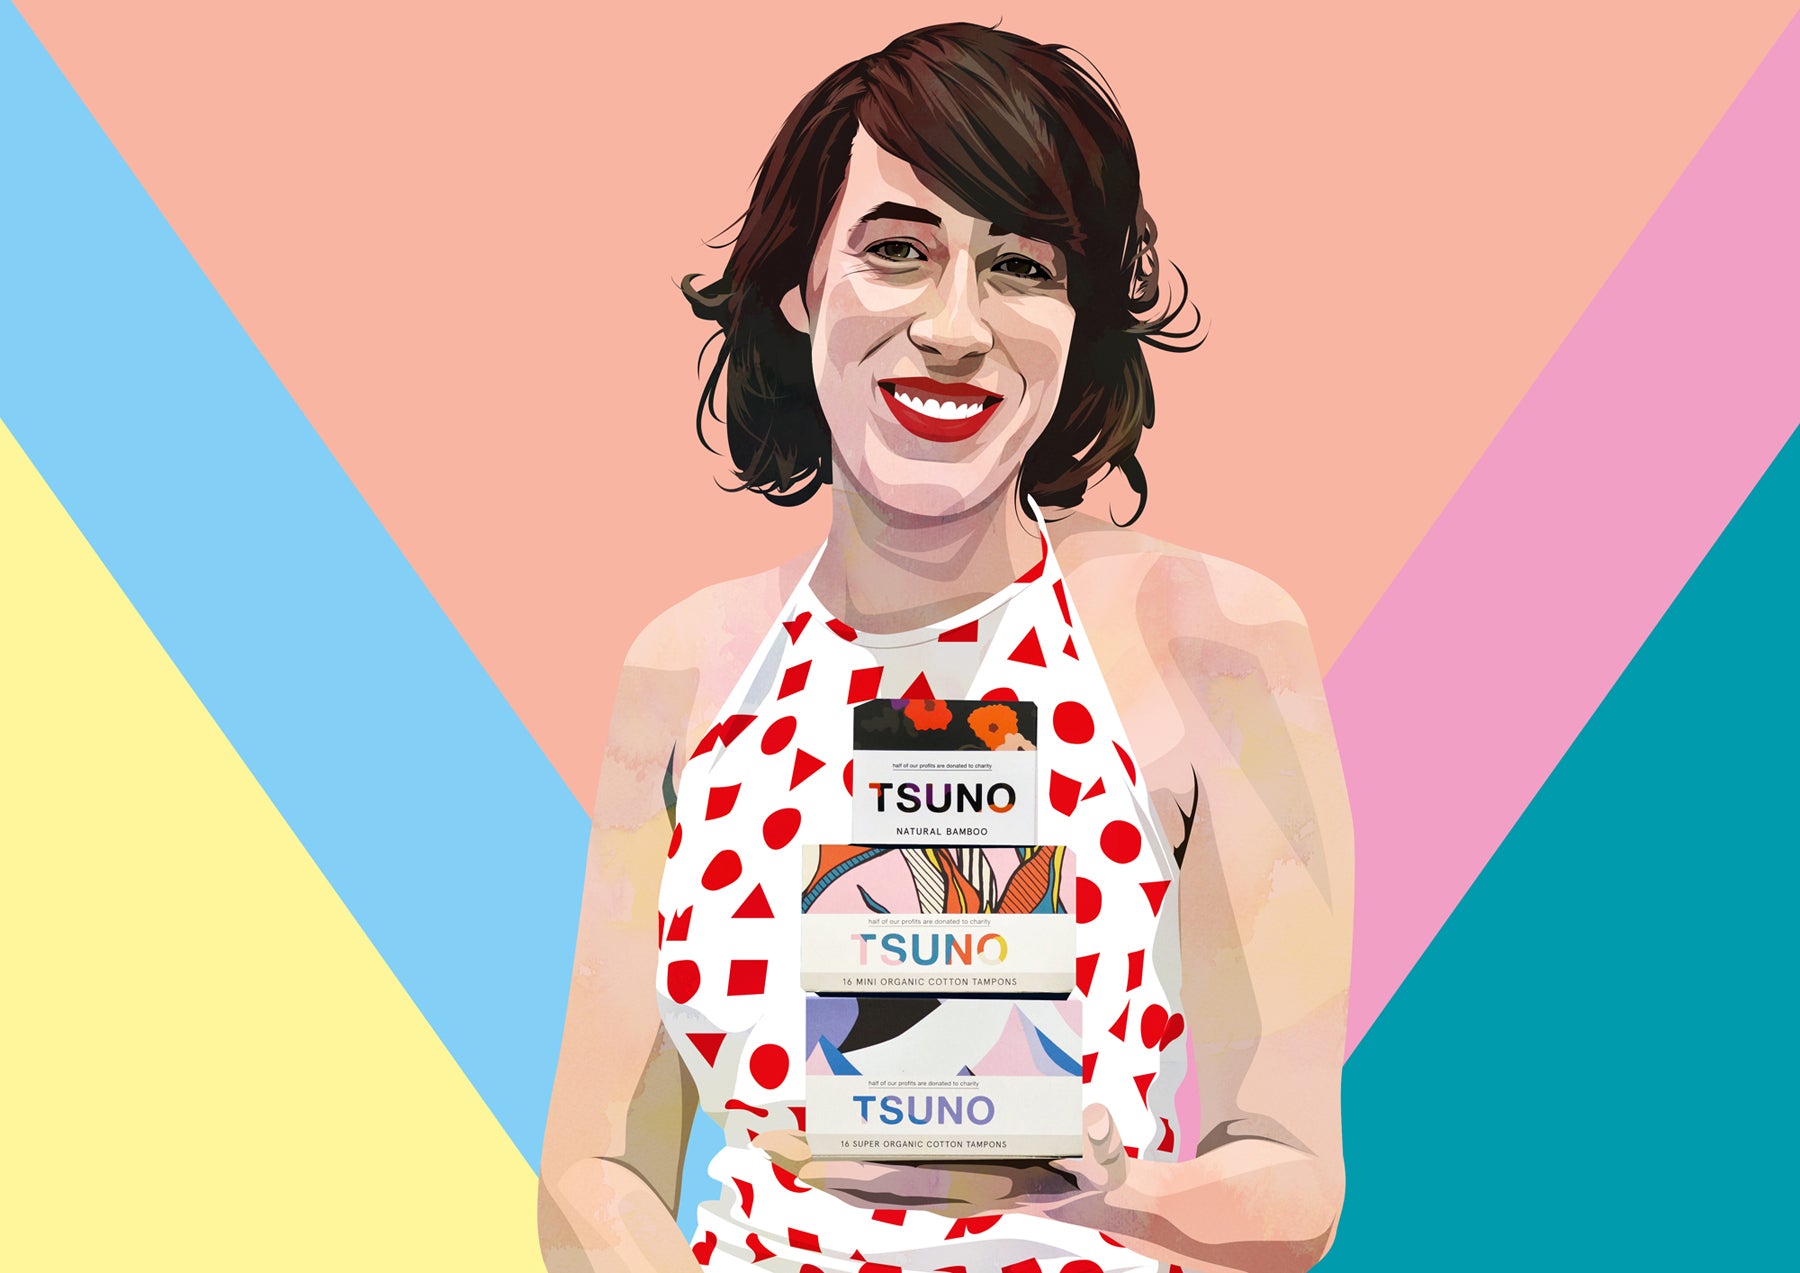 Illustration of Roz Campbell, founder of social change brand Tsuno, holding a stack of three boxes that read "TSUNO".